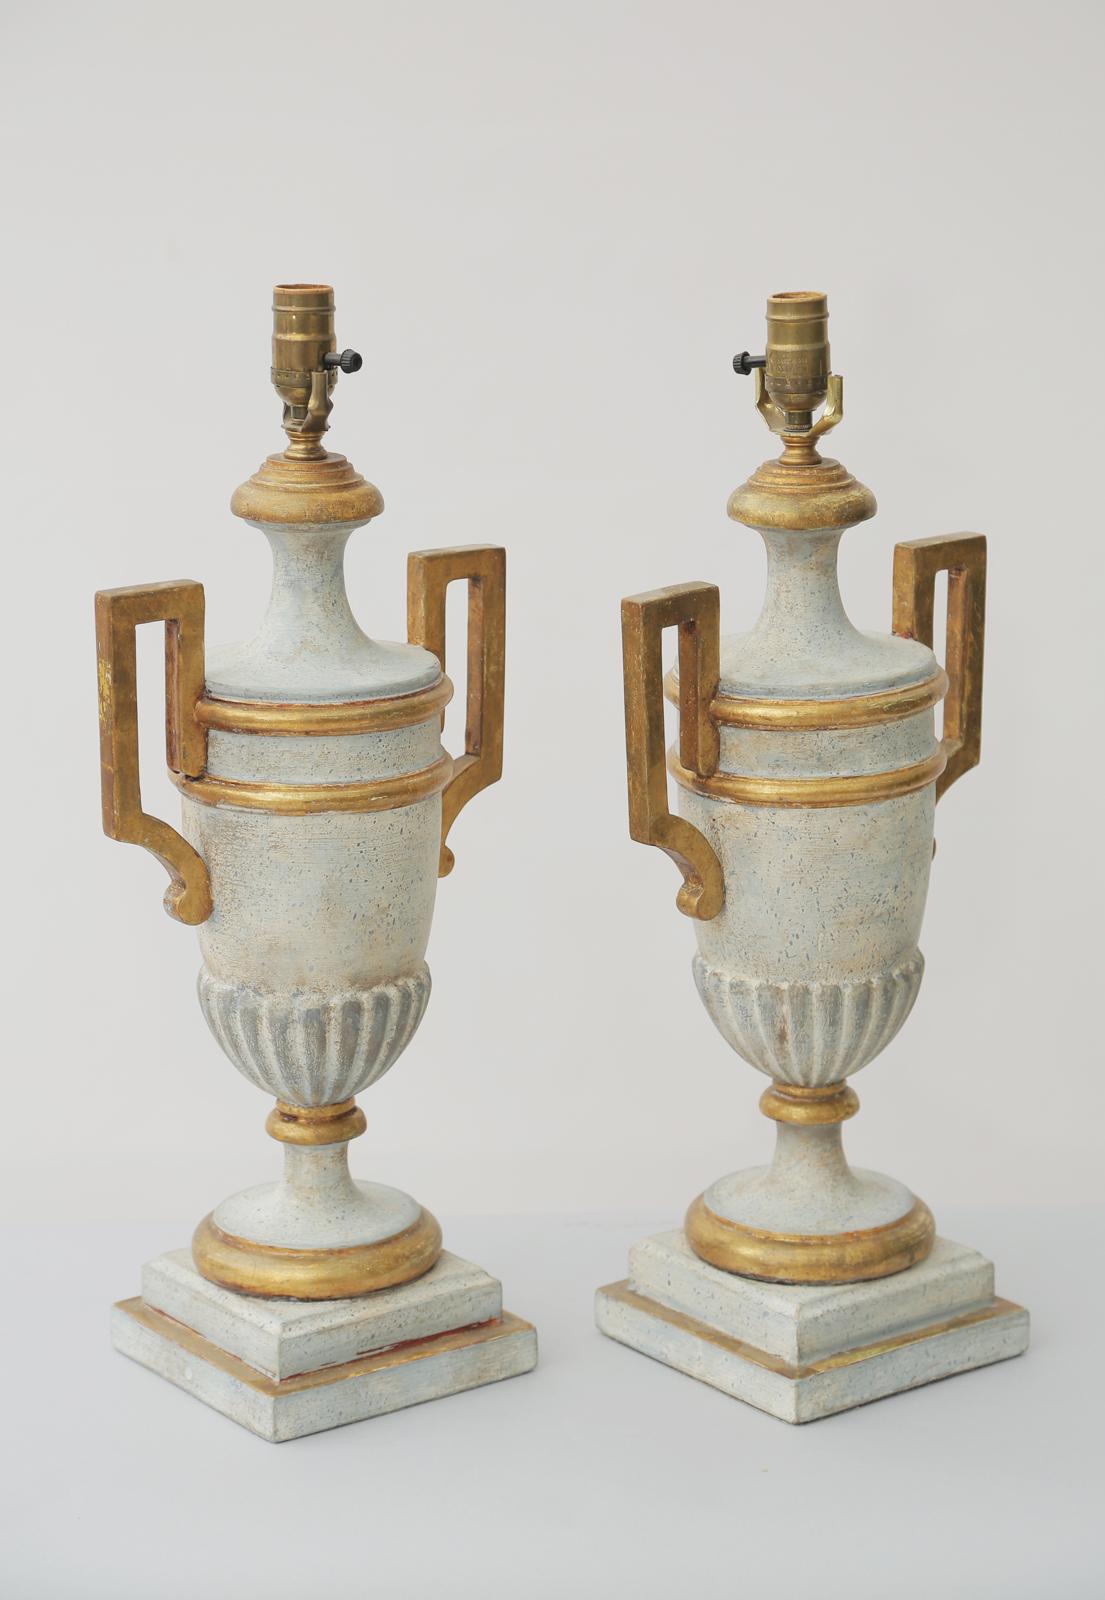 Pair of table lamps, of wood with a painted and parcel gilt finish showing natural wear; each lidded amphora urn-form body with exaggerated handles, semi-lobbed body, over socle base.

Stock ID: D3184